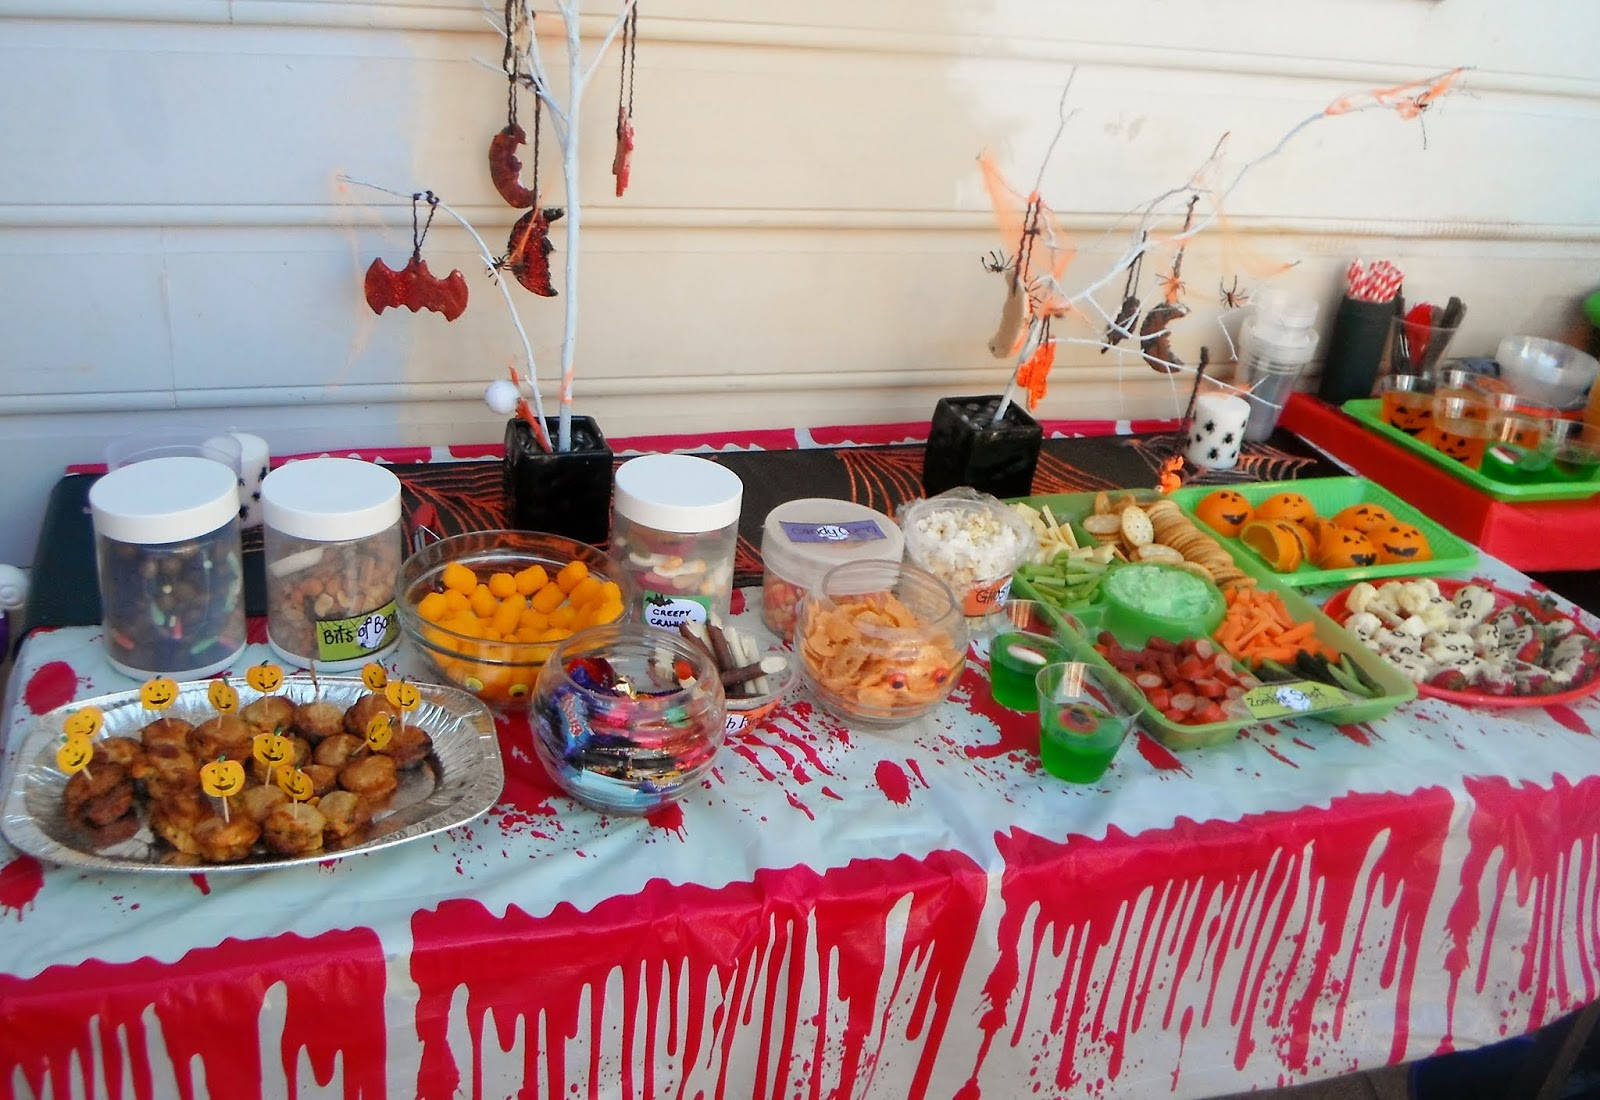 Easy Halloween Party Food Ideas For Adults
 Adventures at home with Mum Halloween Party Food